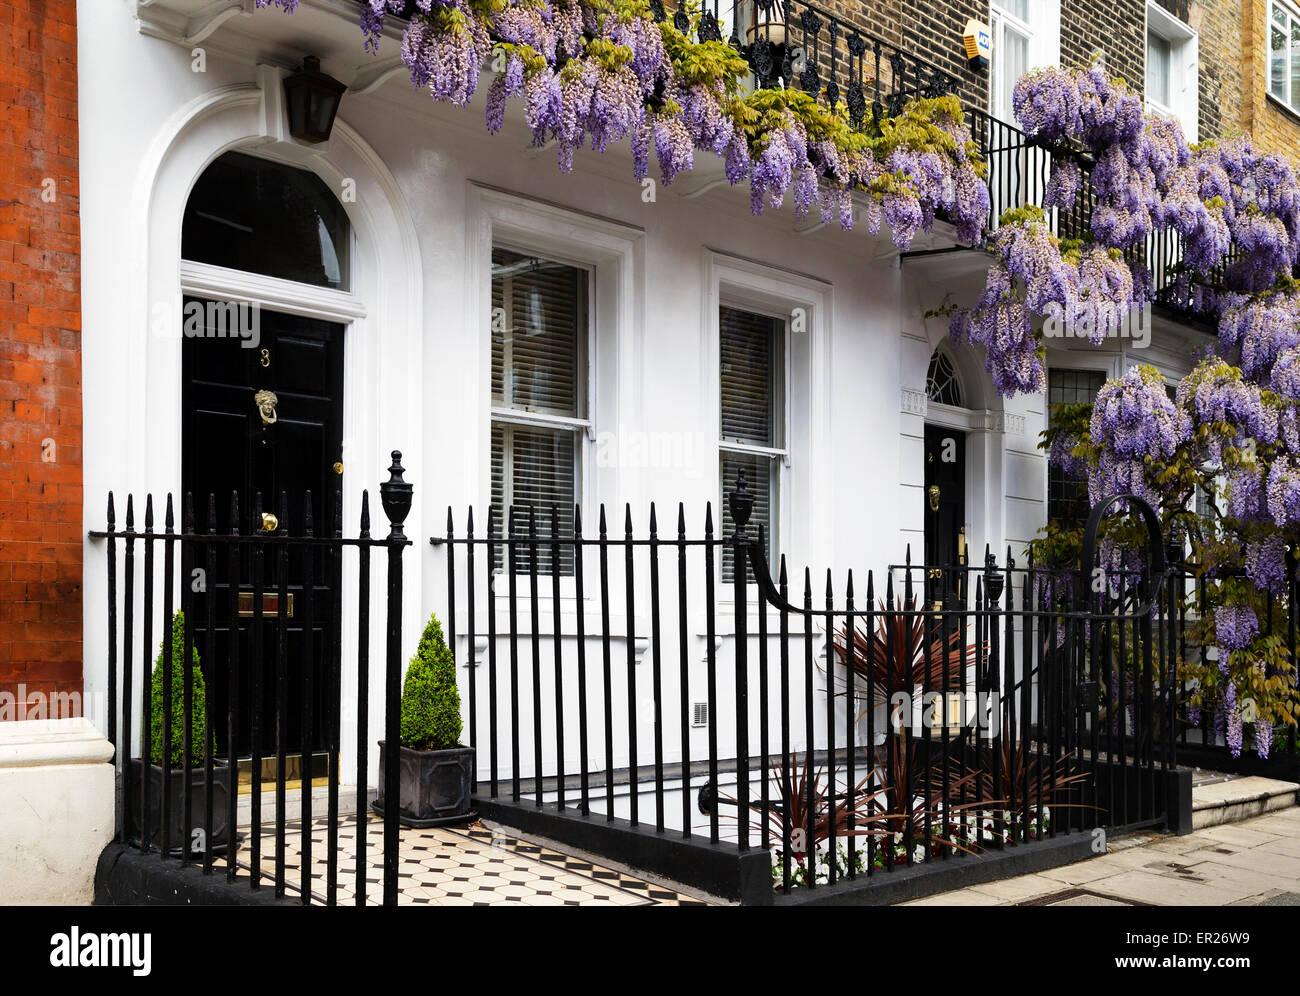 Wisteria blossom afficher, Marylebone, Londres, Angleterre, Royaume-Uni Banque D'Images